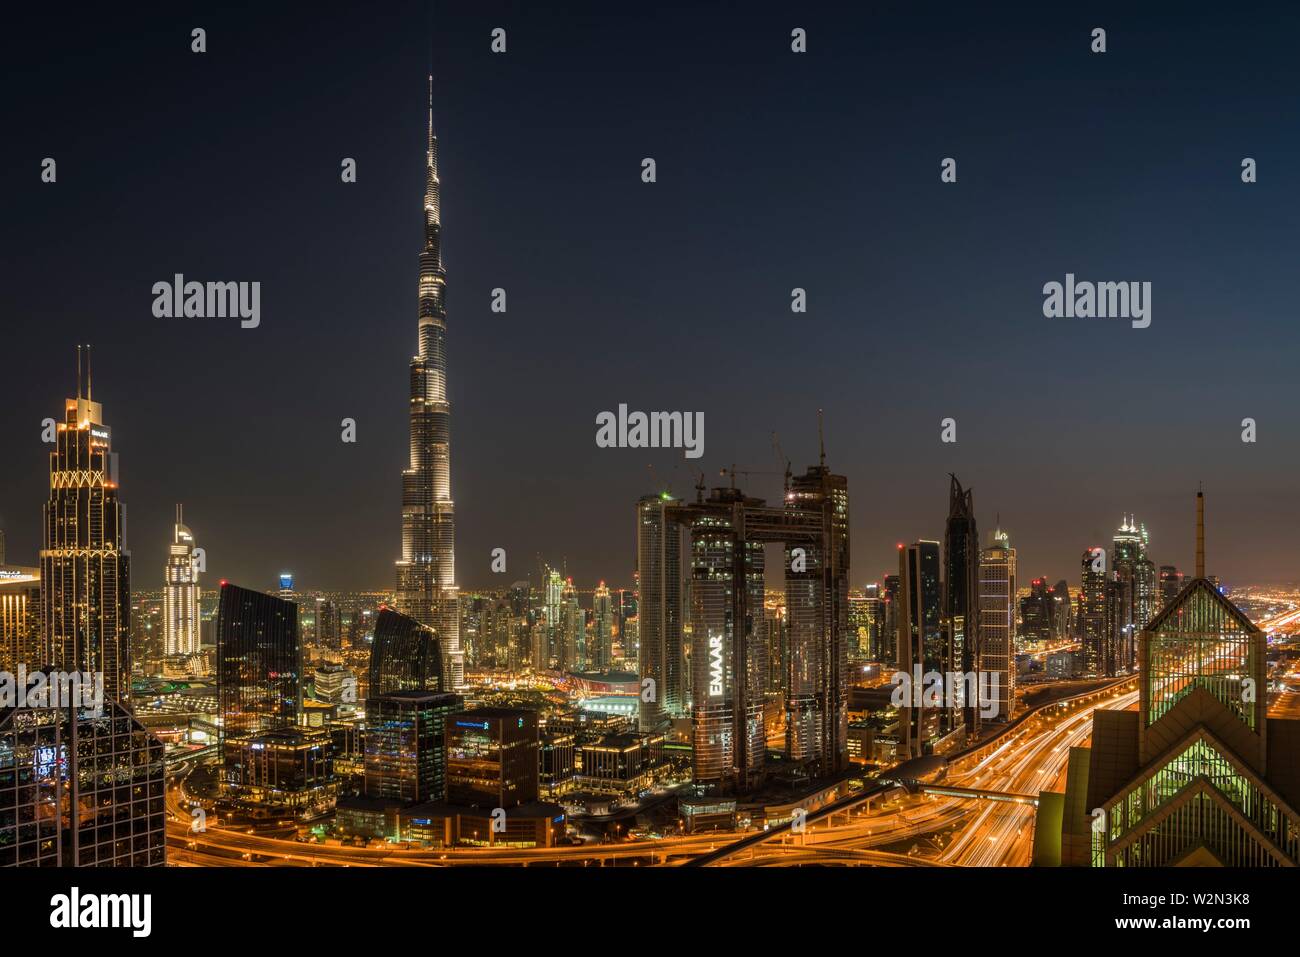 The Burj Khalifa and city skyline at night in downtown Dubai, UAE, Middle East. Stock Photo